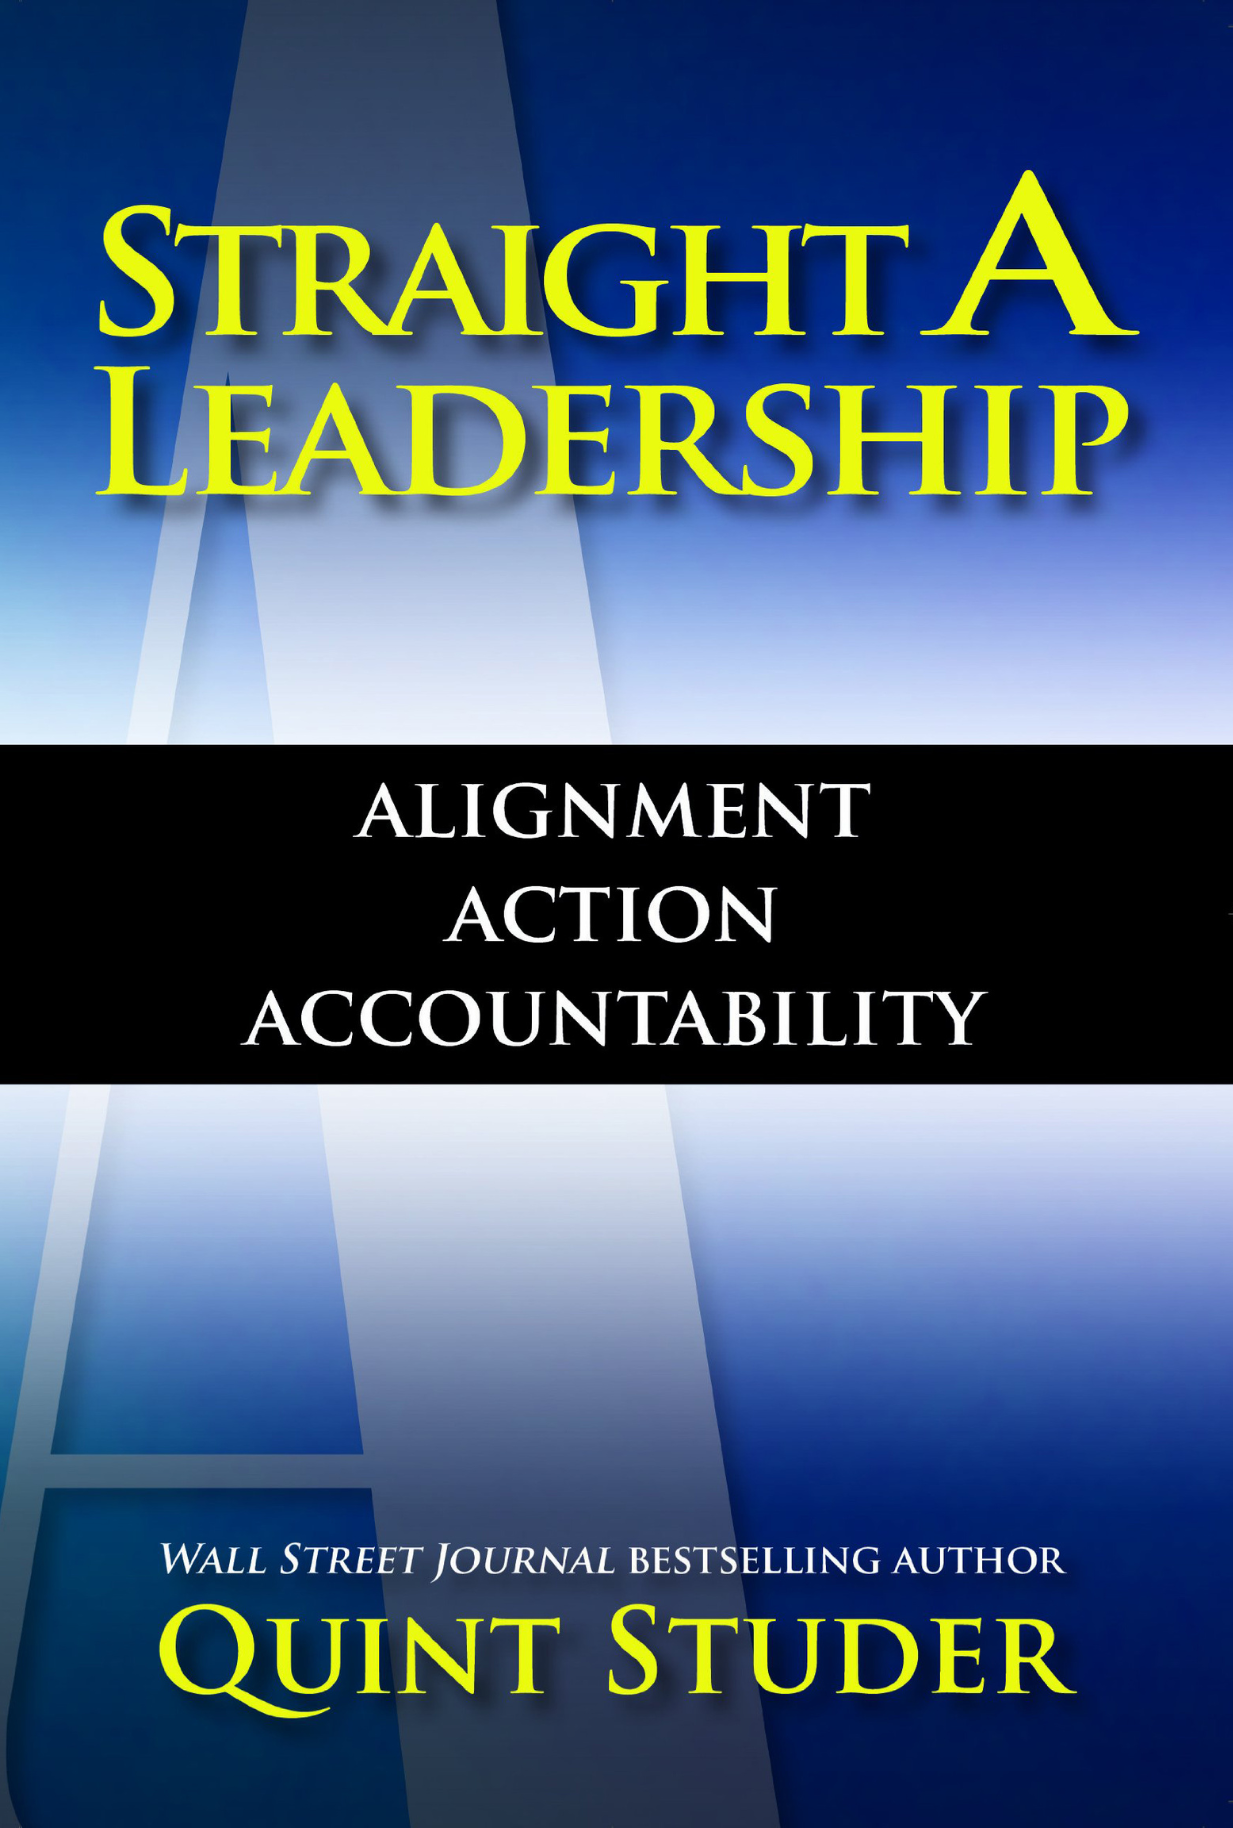 Straight A Leadership by Quint Studer